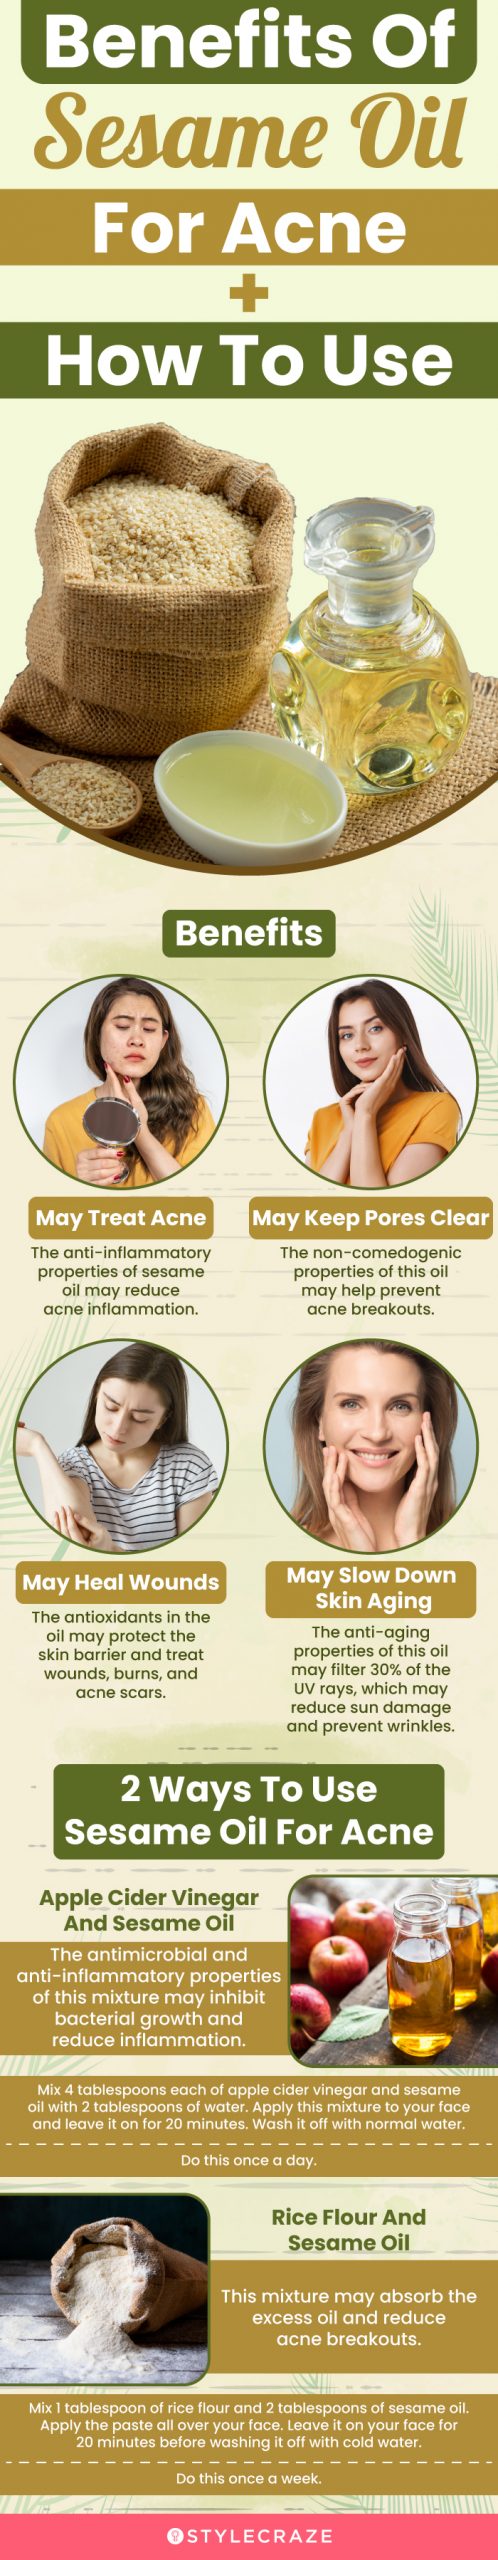 benefits and how to use sesame oil for acne (infographic)